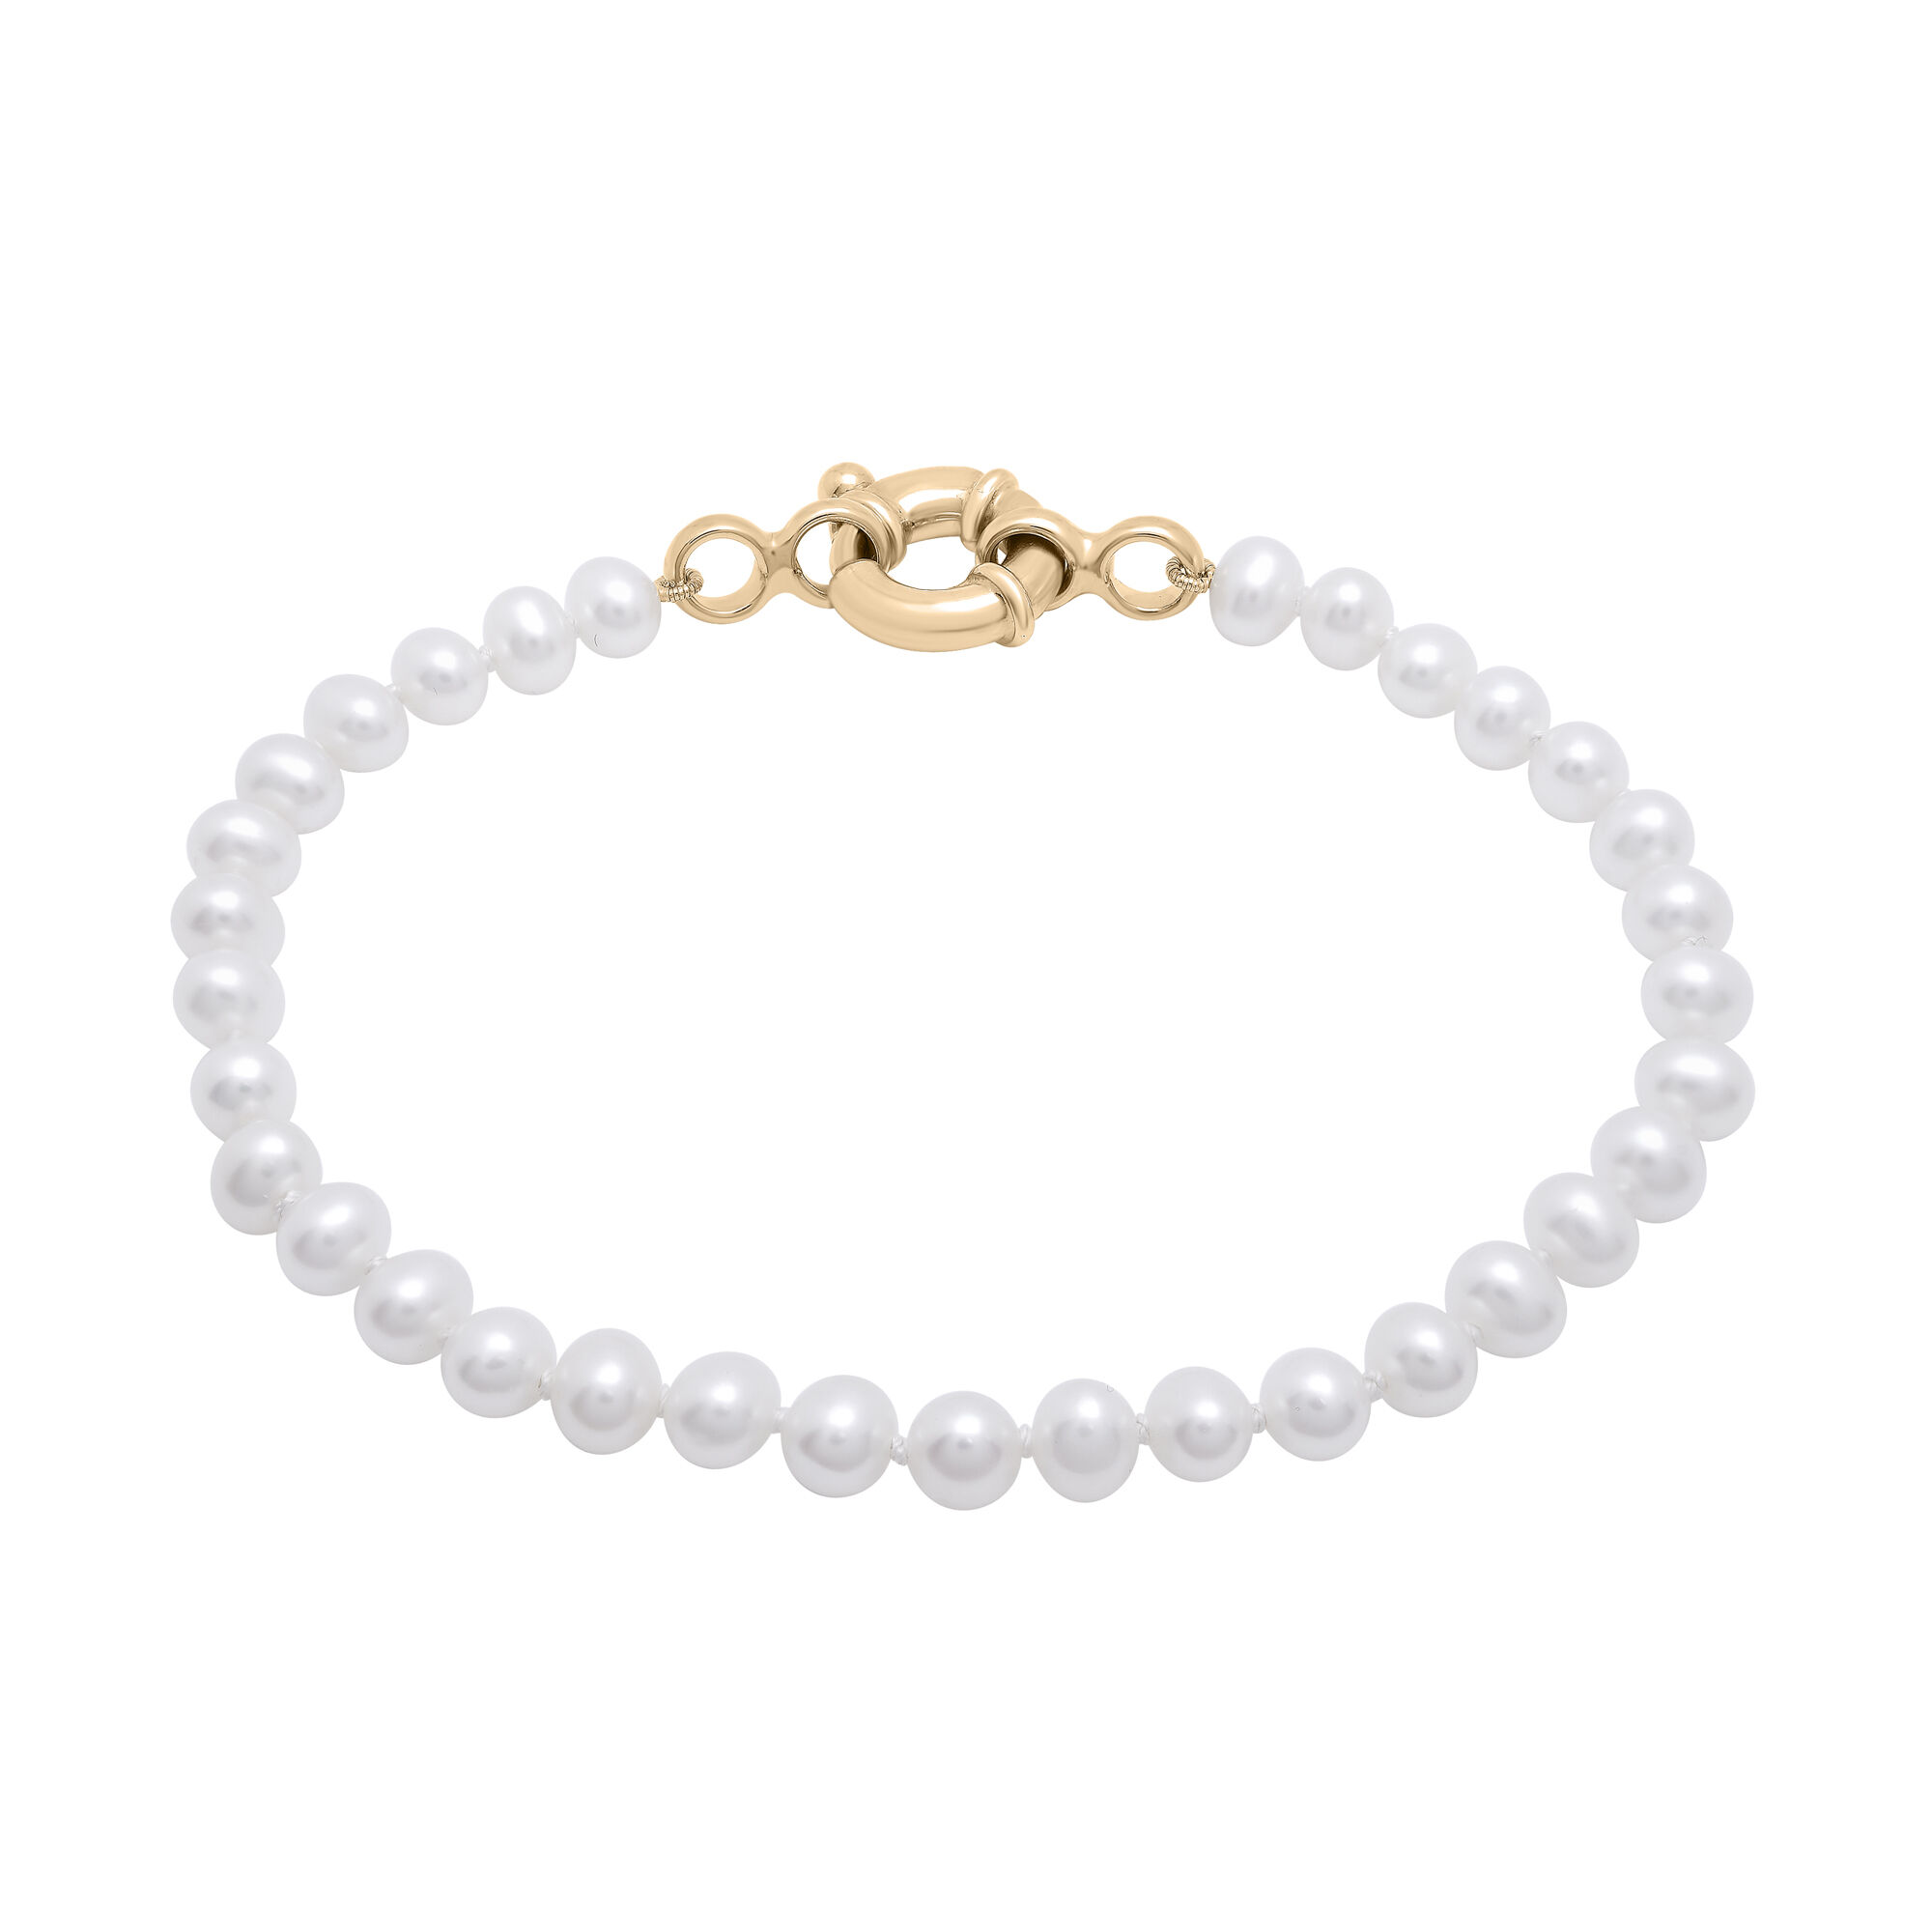 Peridot and Freshwater Pearl Bracelet ❤️ - Biographie